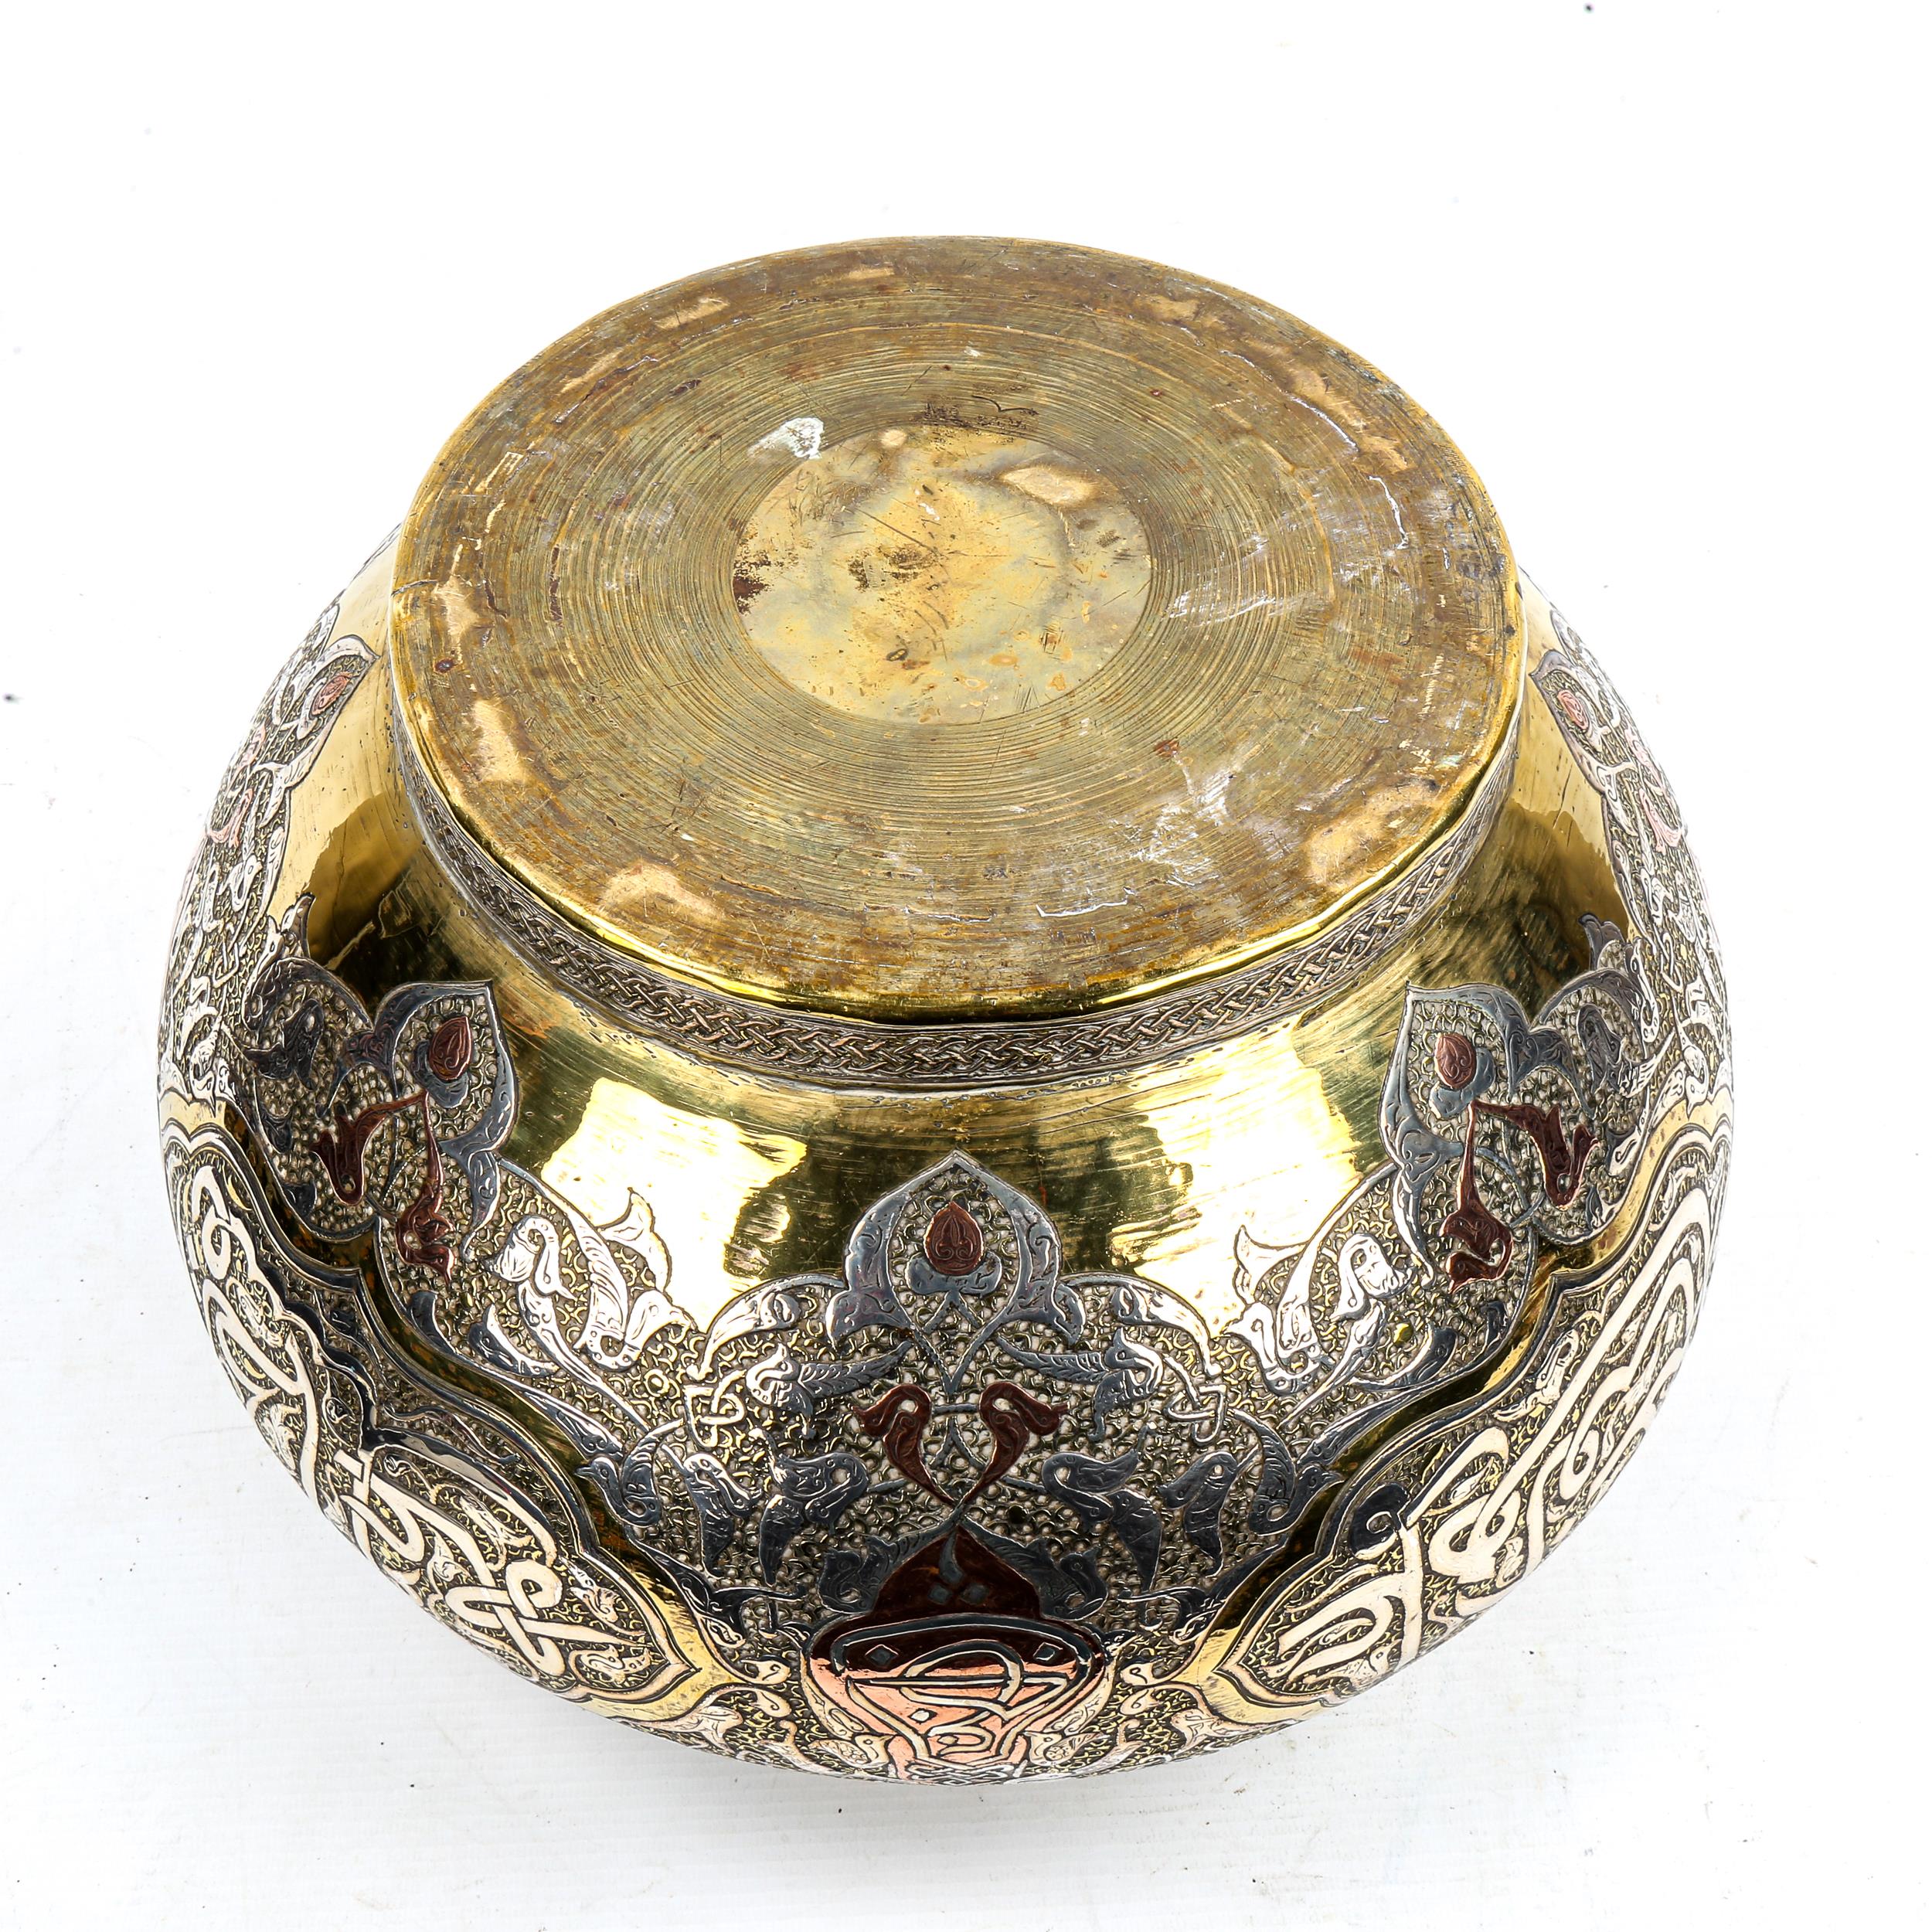 A large Persian brass jardiniere, late 19th century, with intricate inlaid silver and - Image 3 of 3